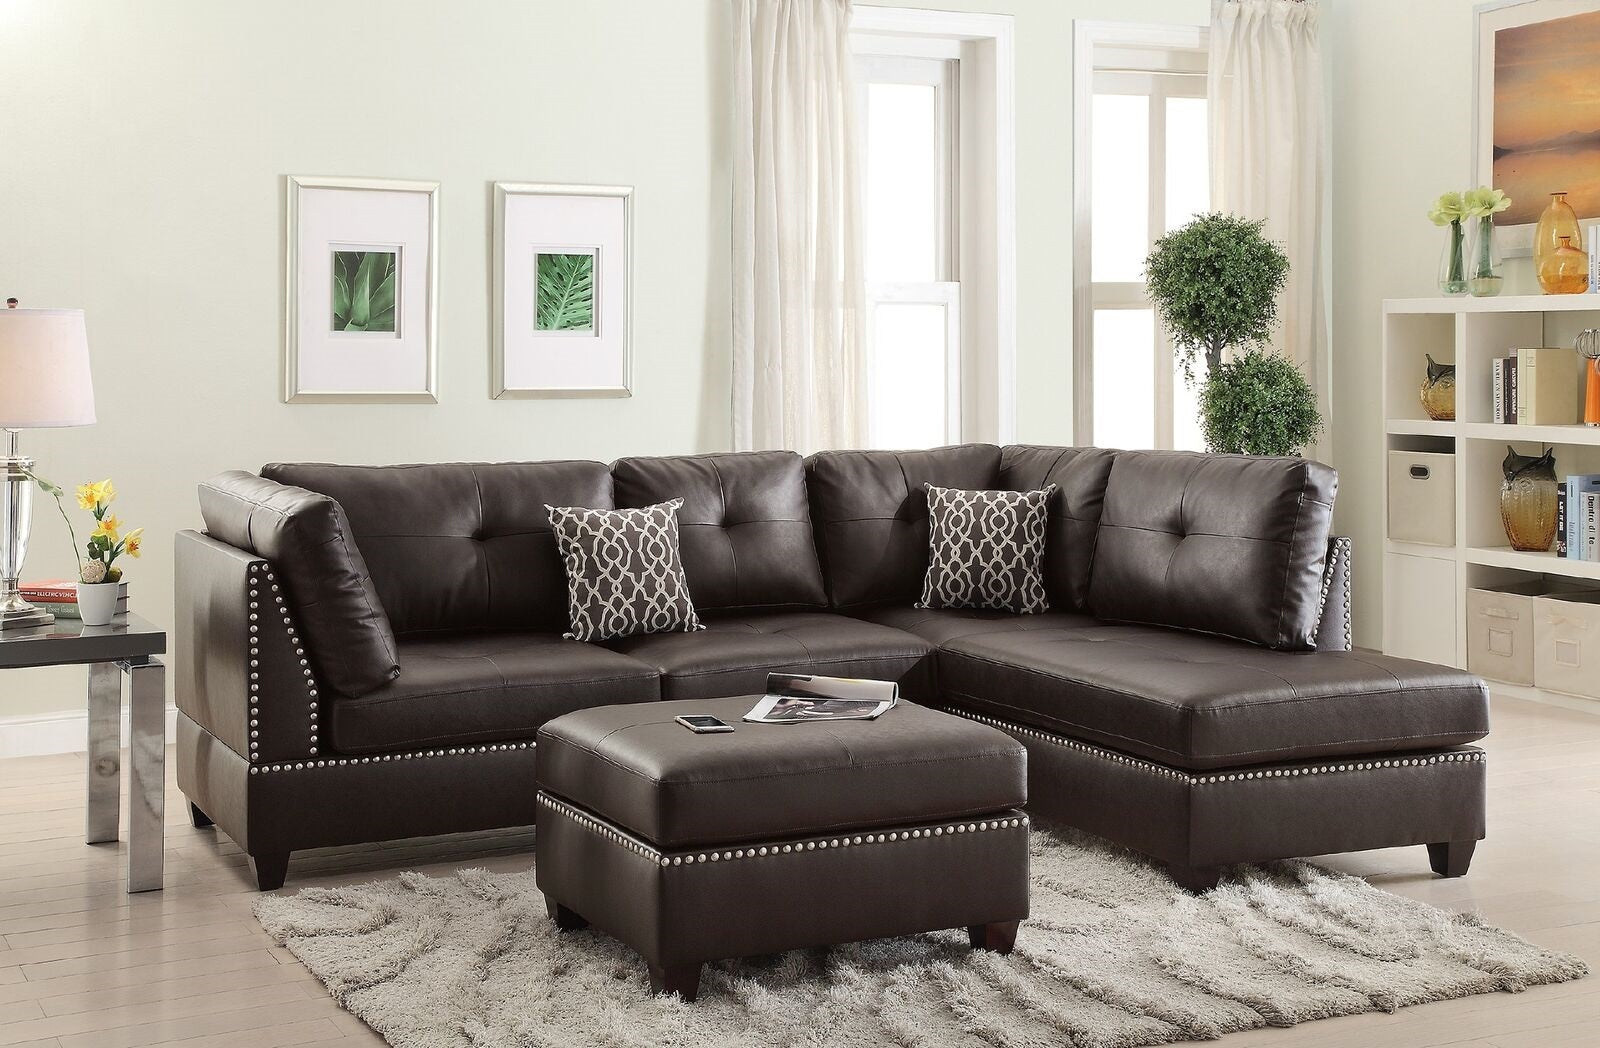 3 pcs Sectional Sofa Espresso Bonded Leather Cushion espresso-brown-faux leather-wood-primary living